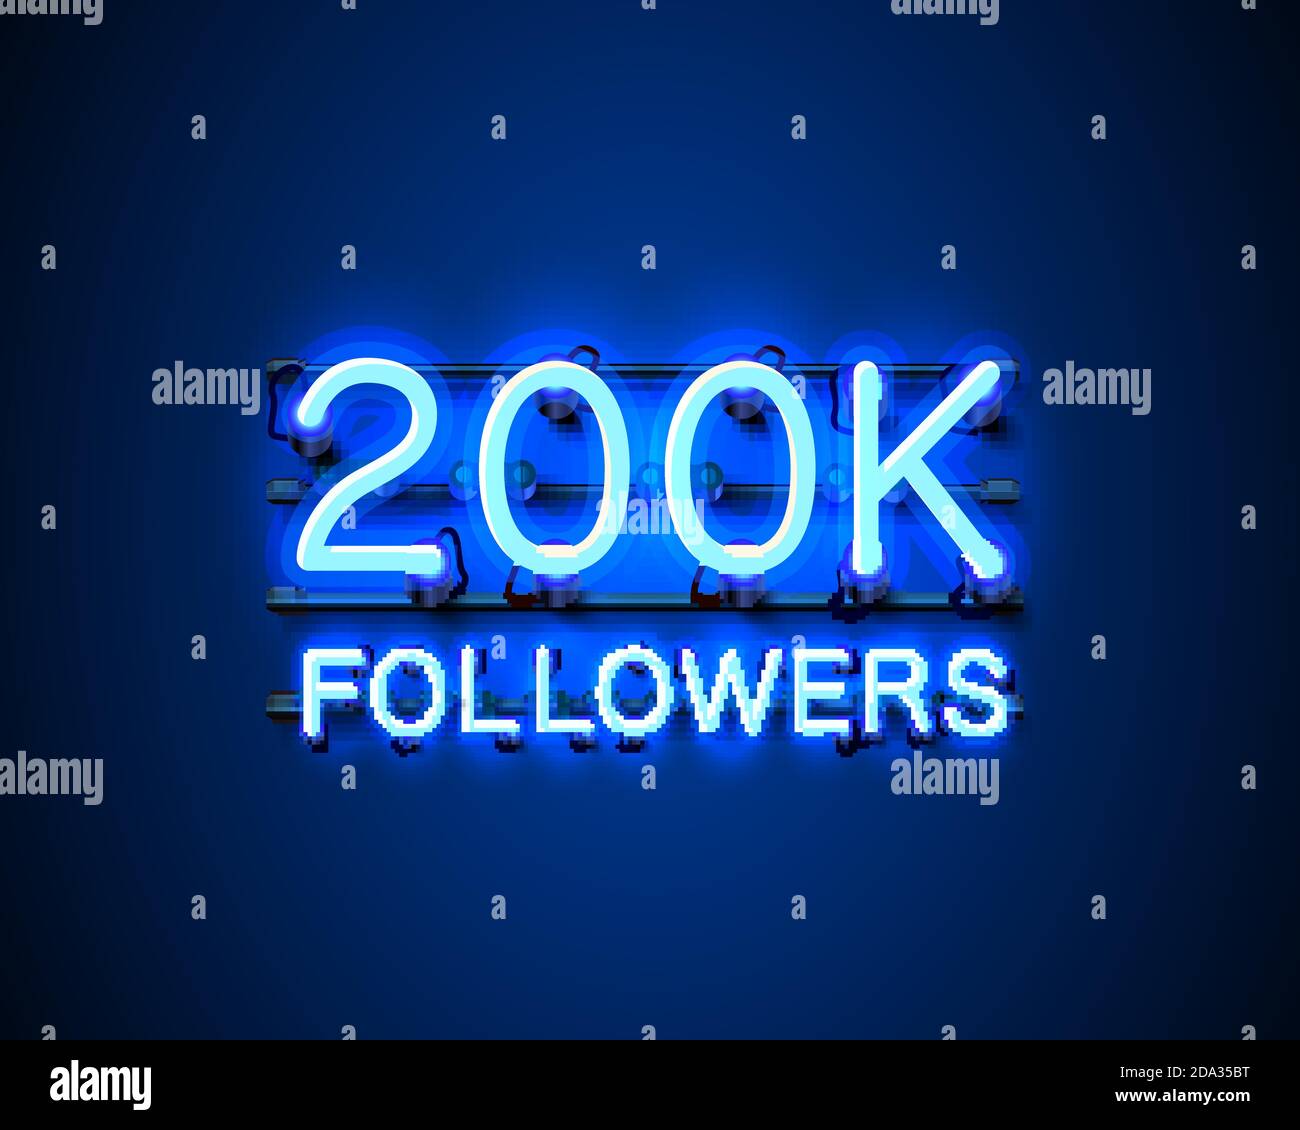 Thank you followers peoples, 200k online social group, neon happy banner celebrate, Vector illustration Stock Vector